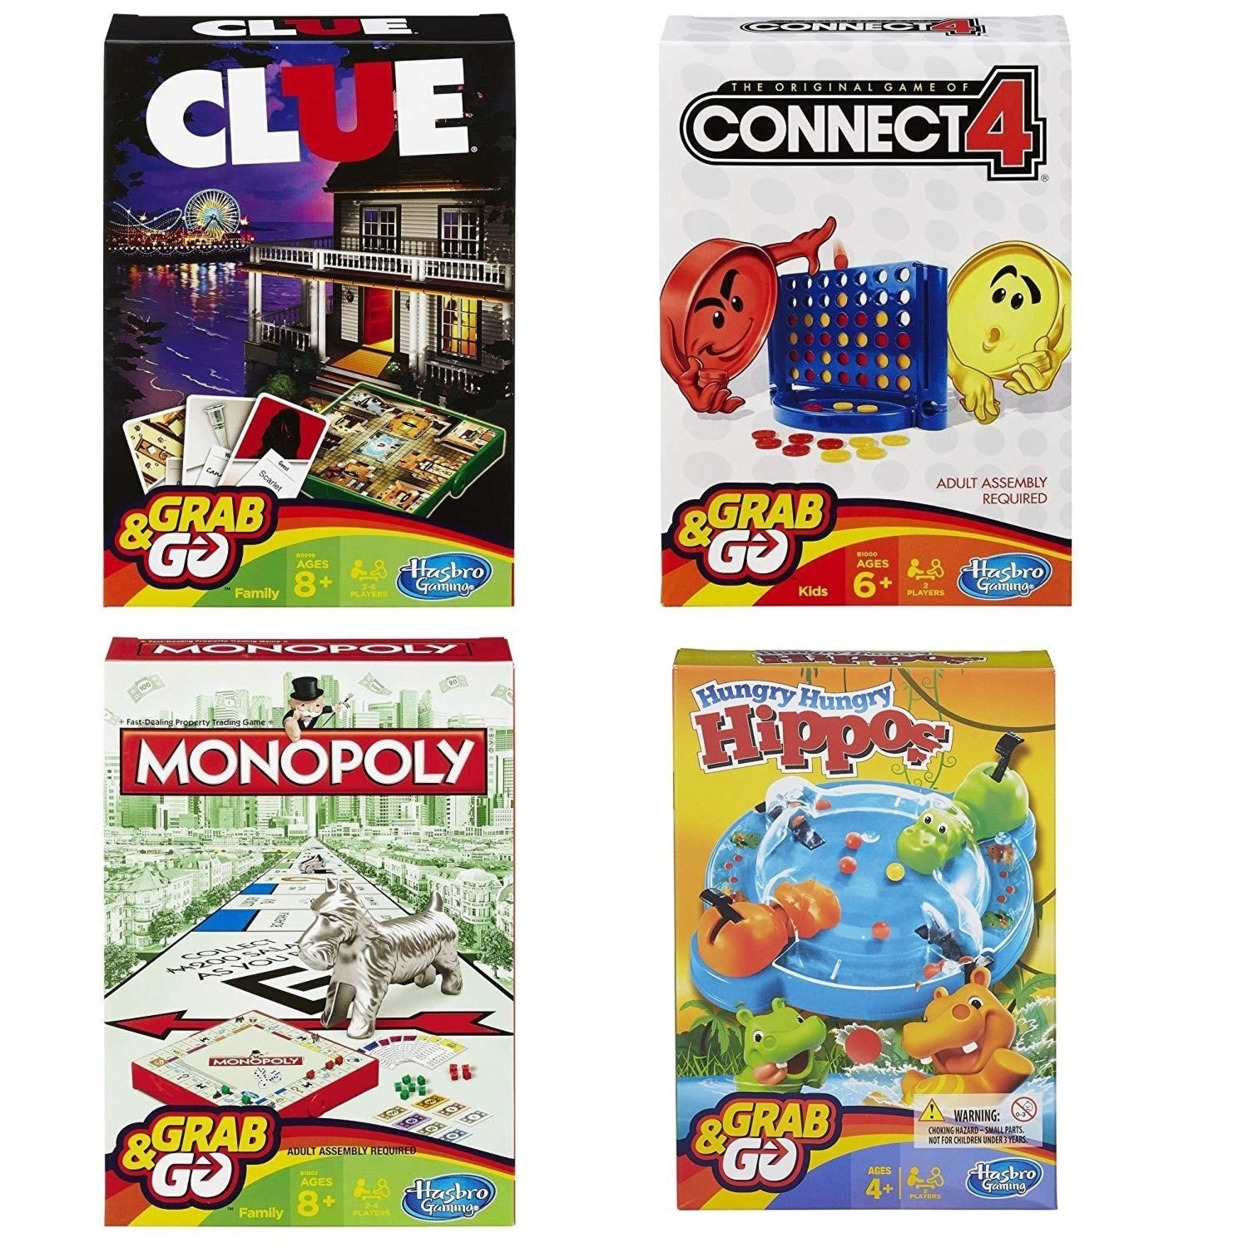 Hasbro Family Grab Hungry Games Clue%ｶﾝﾏ% Hungry Pack Connect 4%ｶﾝﾏ%  Monopoly%ｶﾝﾏ% Hippo Bundle Go and Variety Board